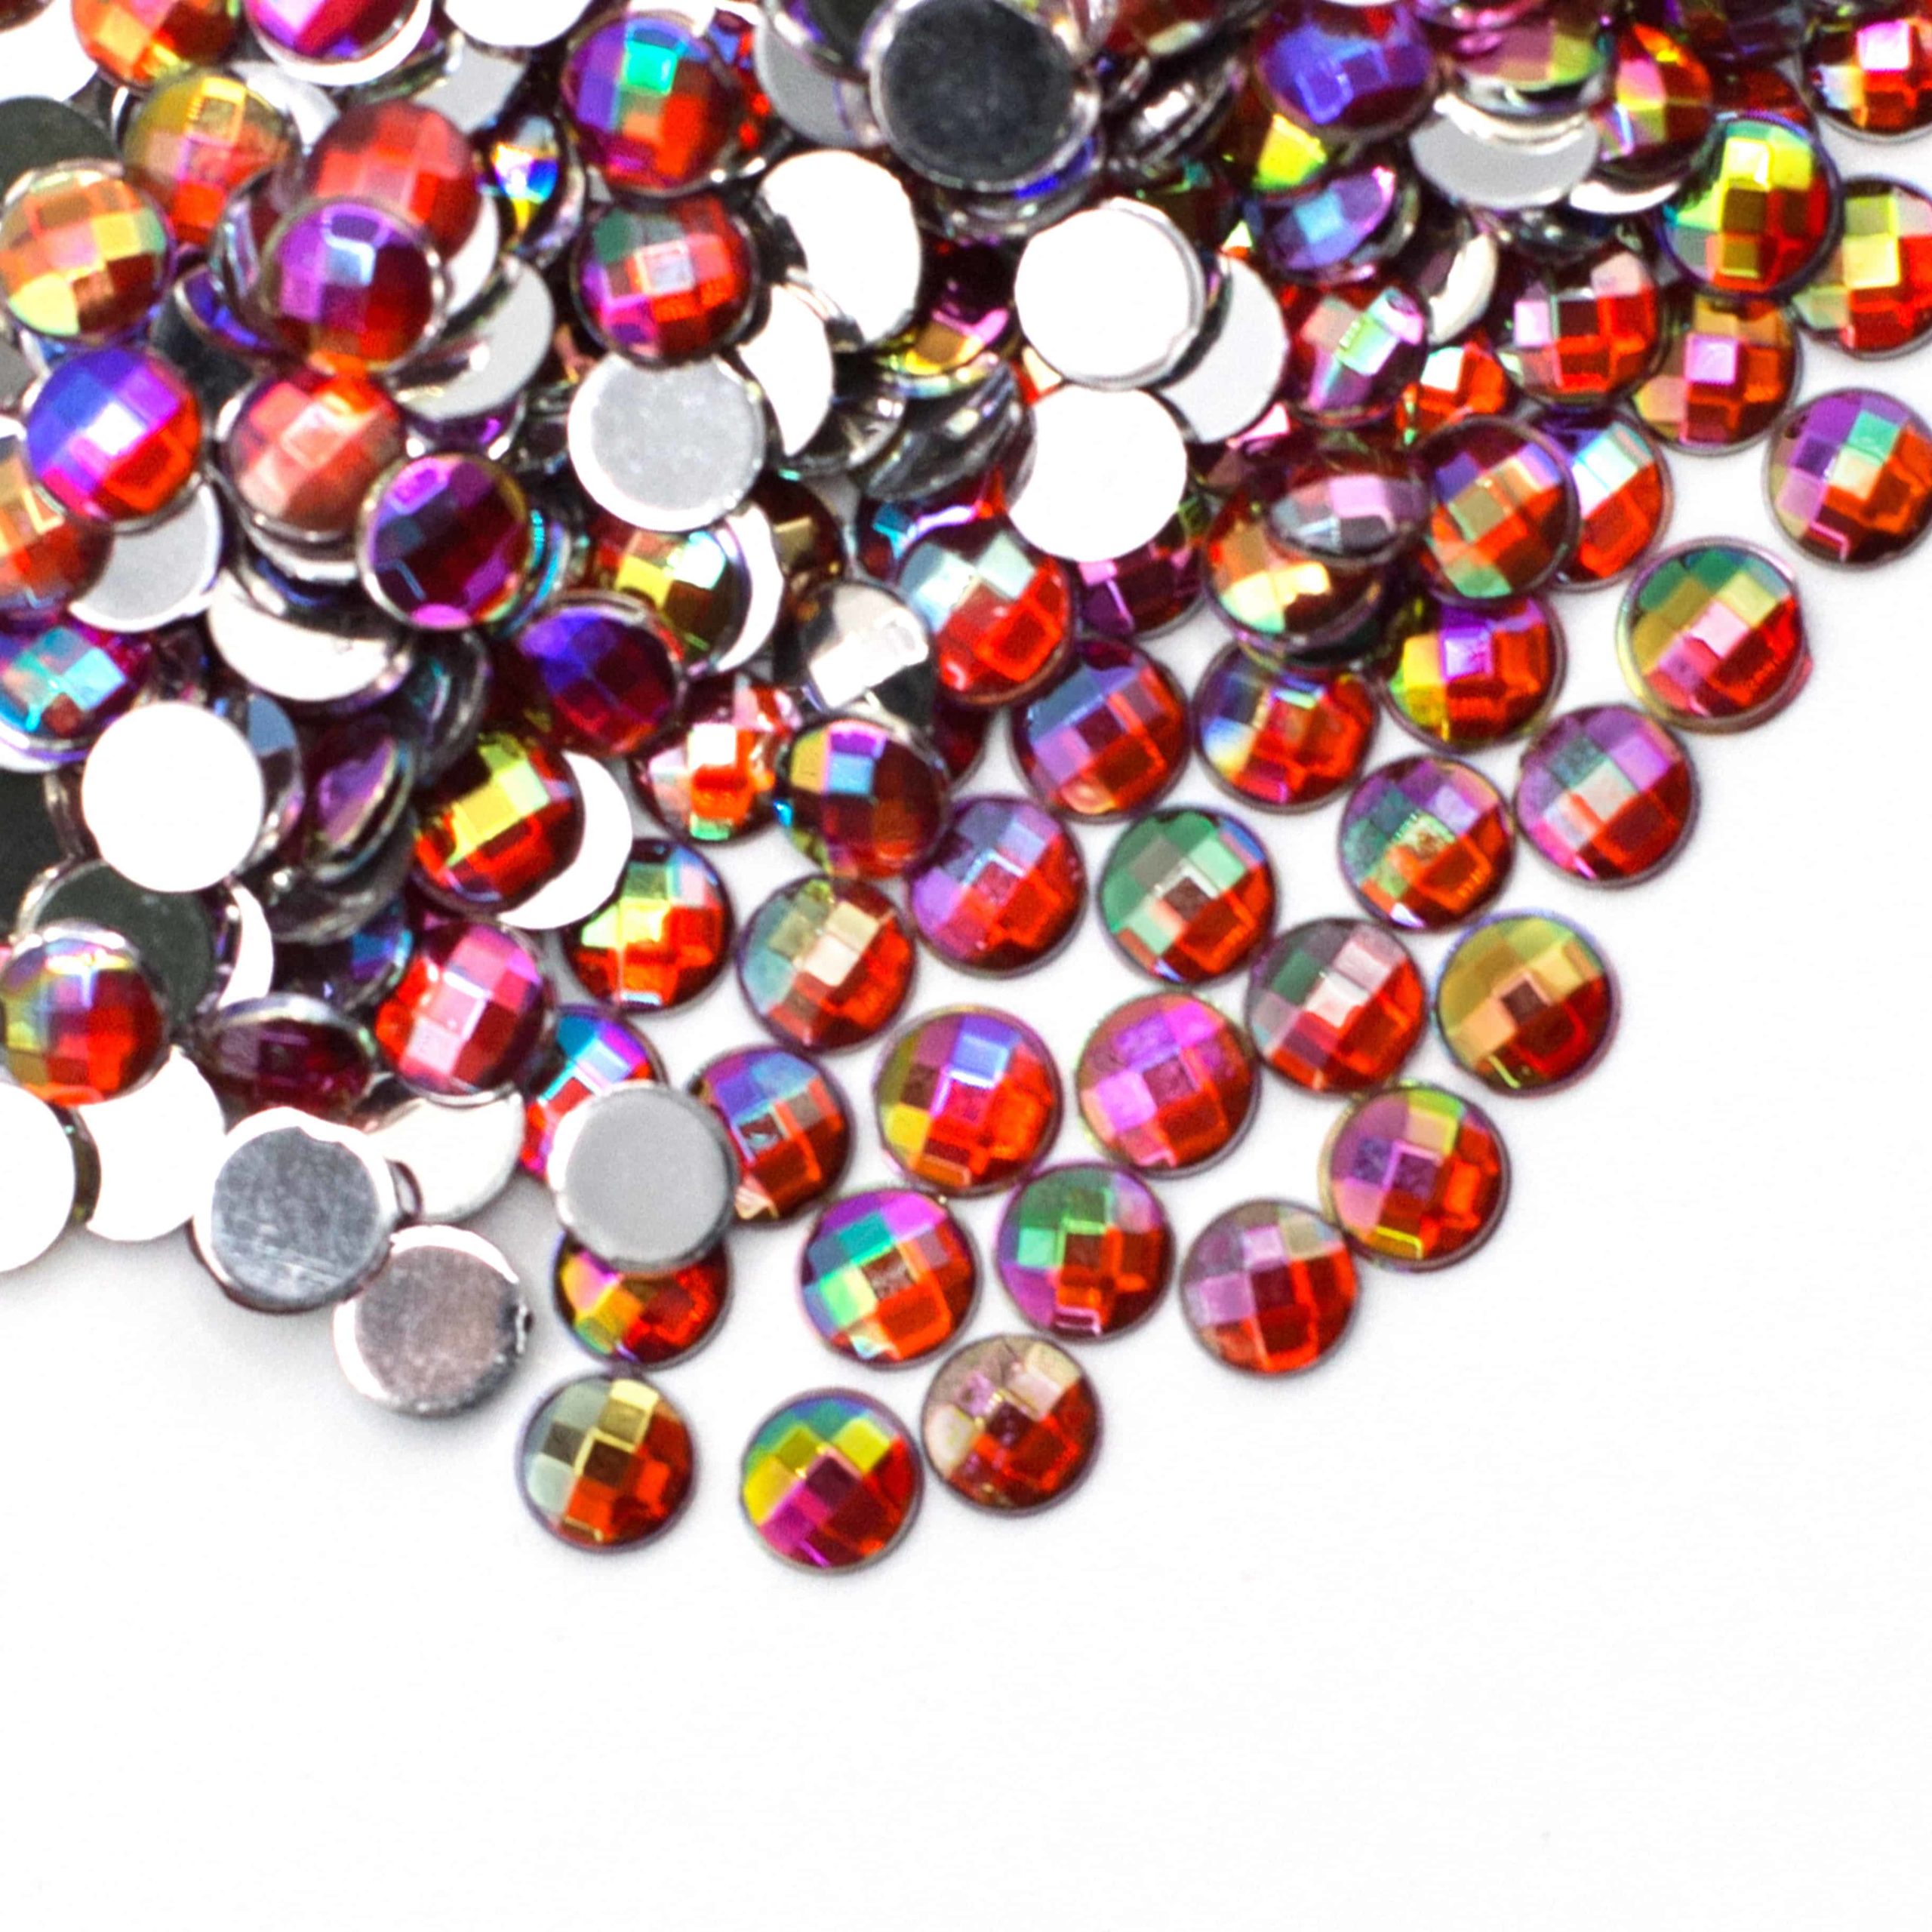 Colored Iridescent Jewels - Craft Supplies - 200 Pieces 